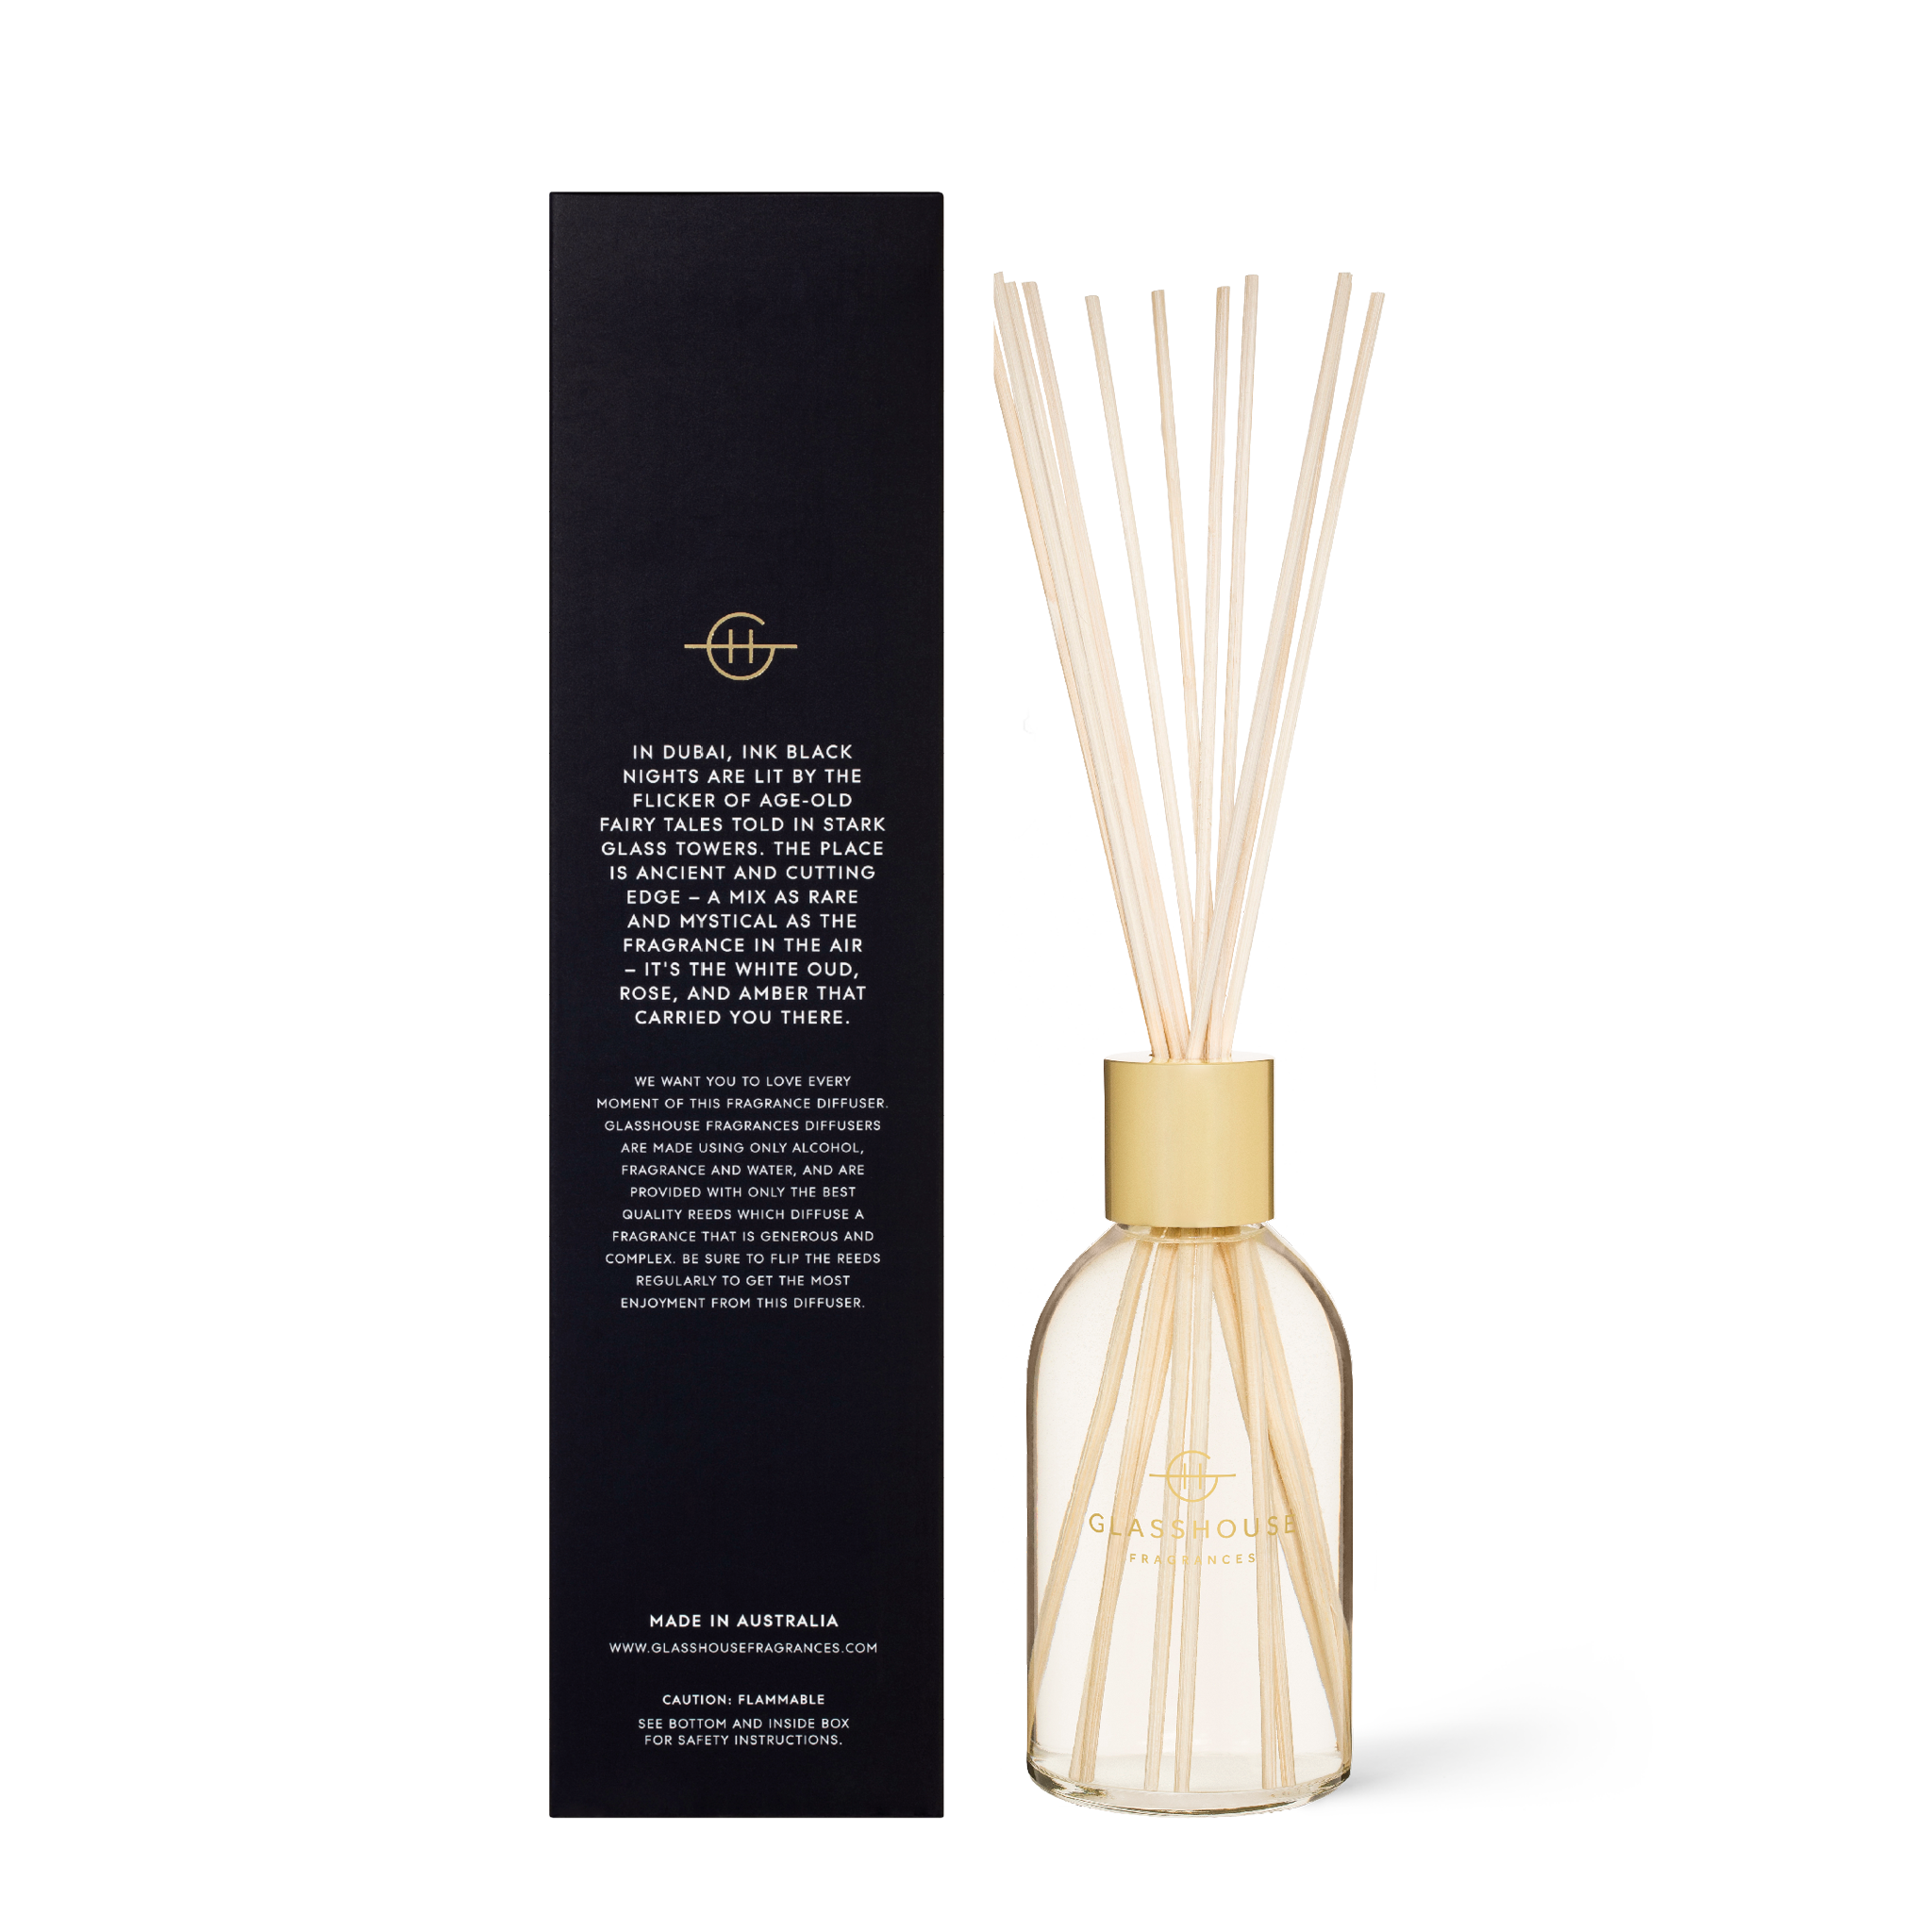 Glasshouse Fragrances Arabian Nights White Oud 250mL Fragrance Diffuser with box - Back of product shot